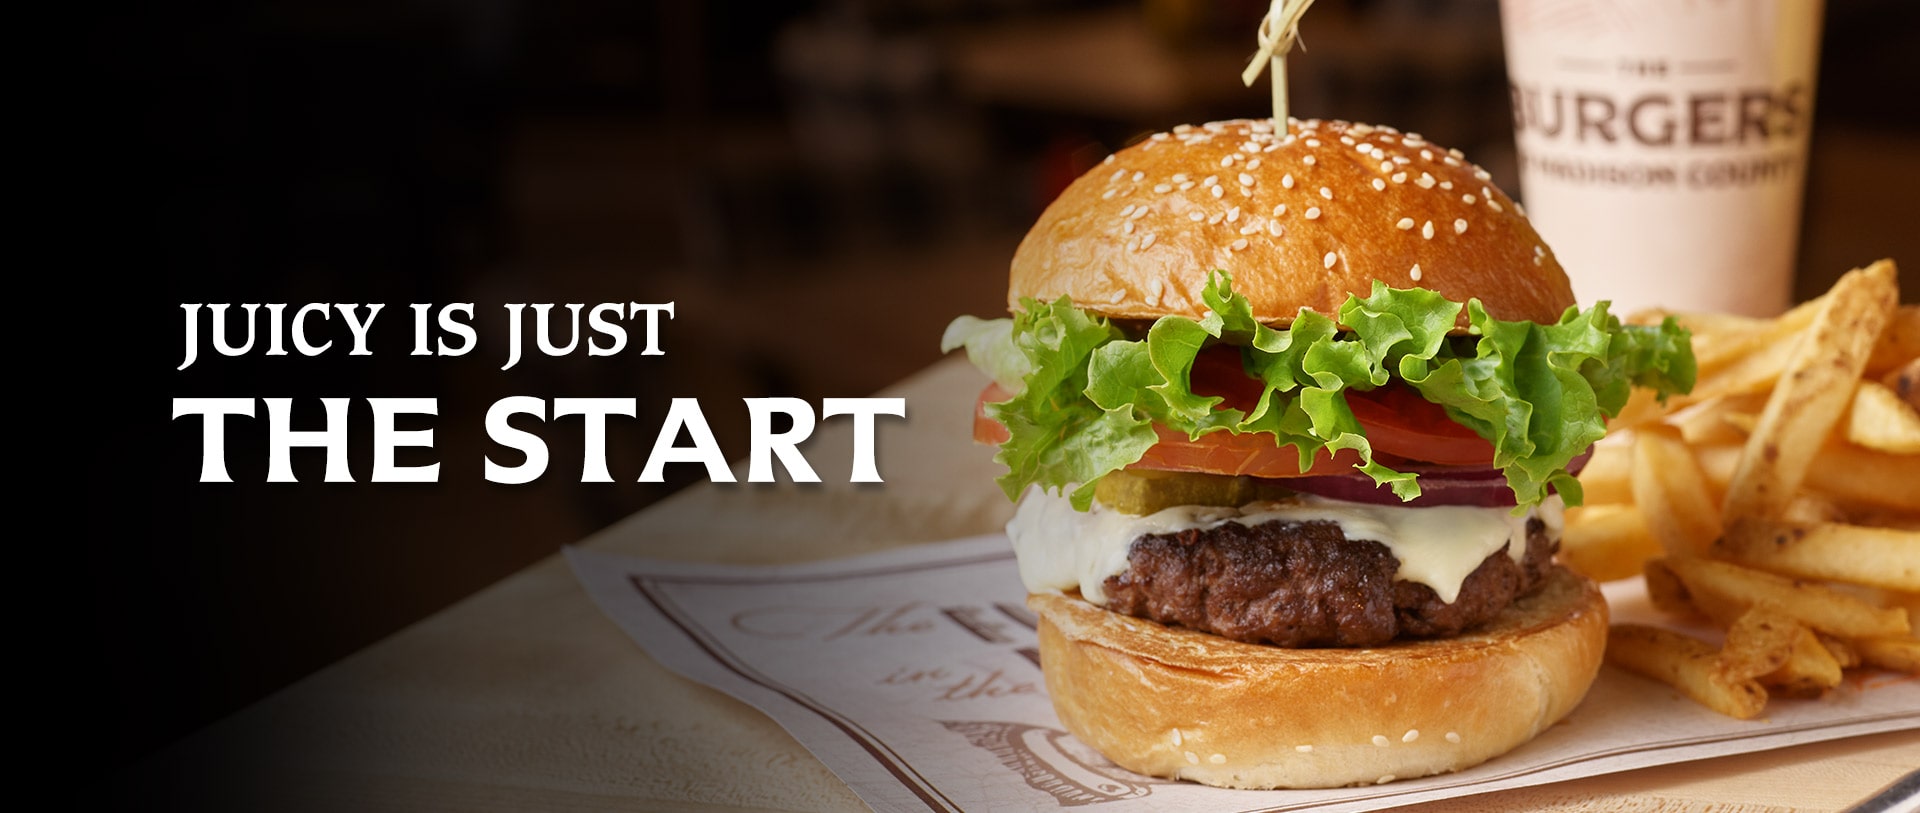 juicy is the start - delicious burger